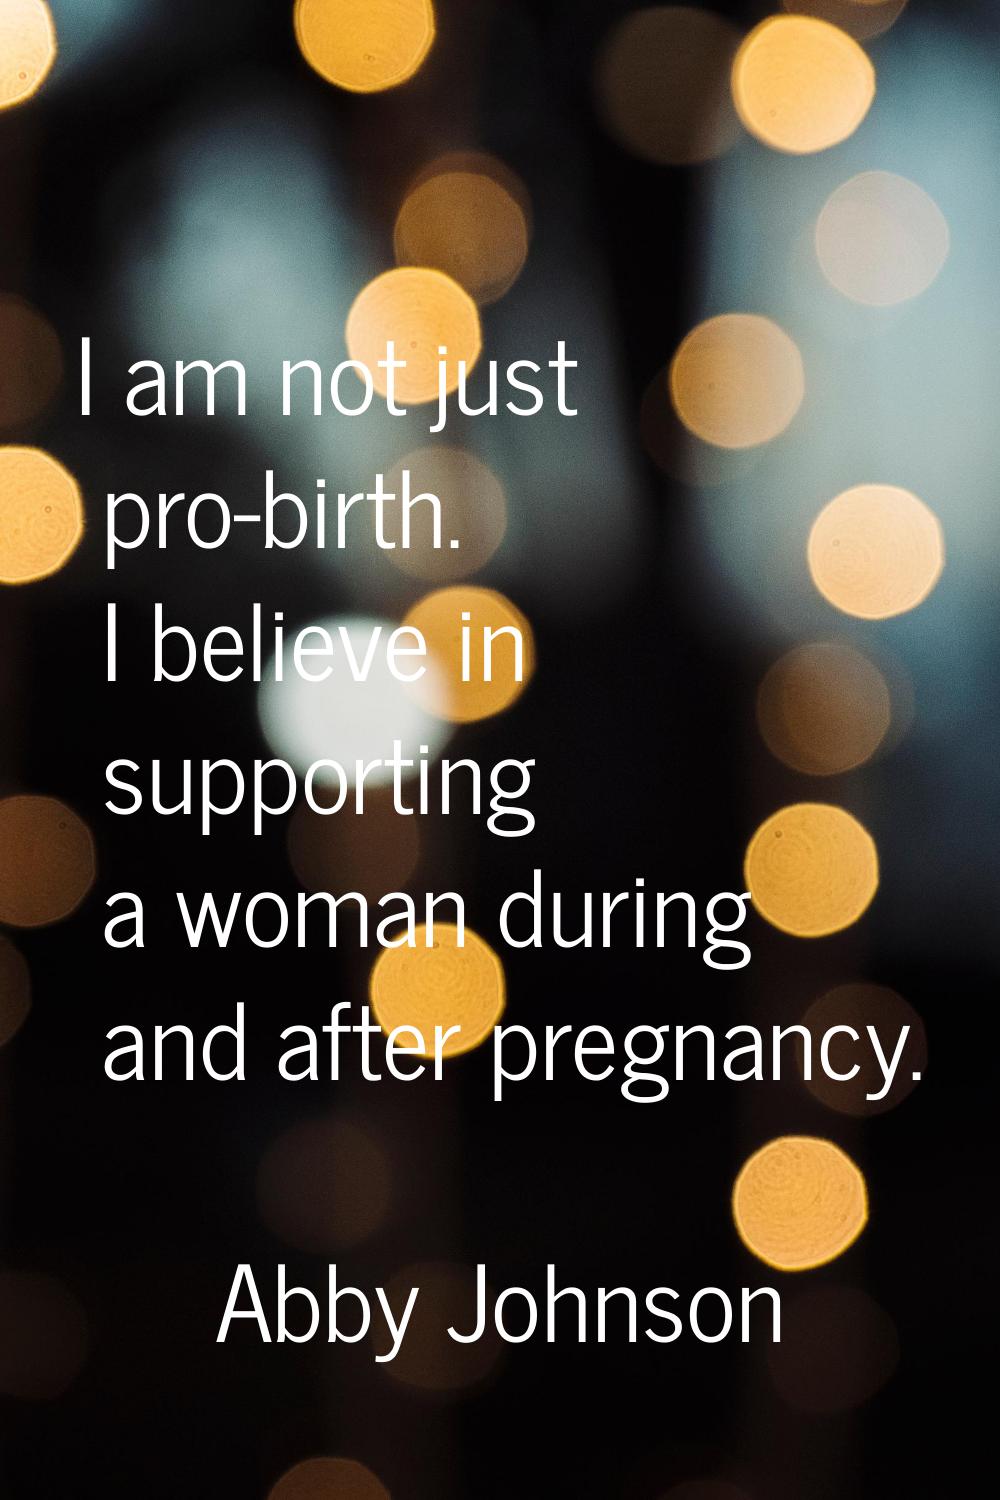 I am not just pro-birth. I believe in supporting a woman during and after pregnancy.